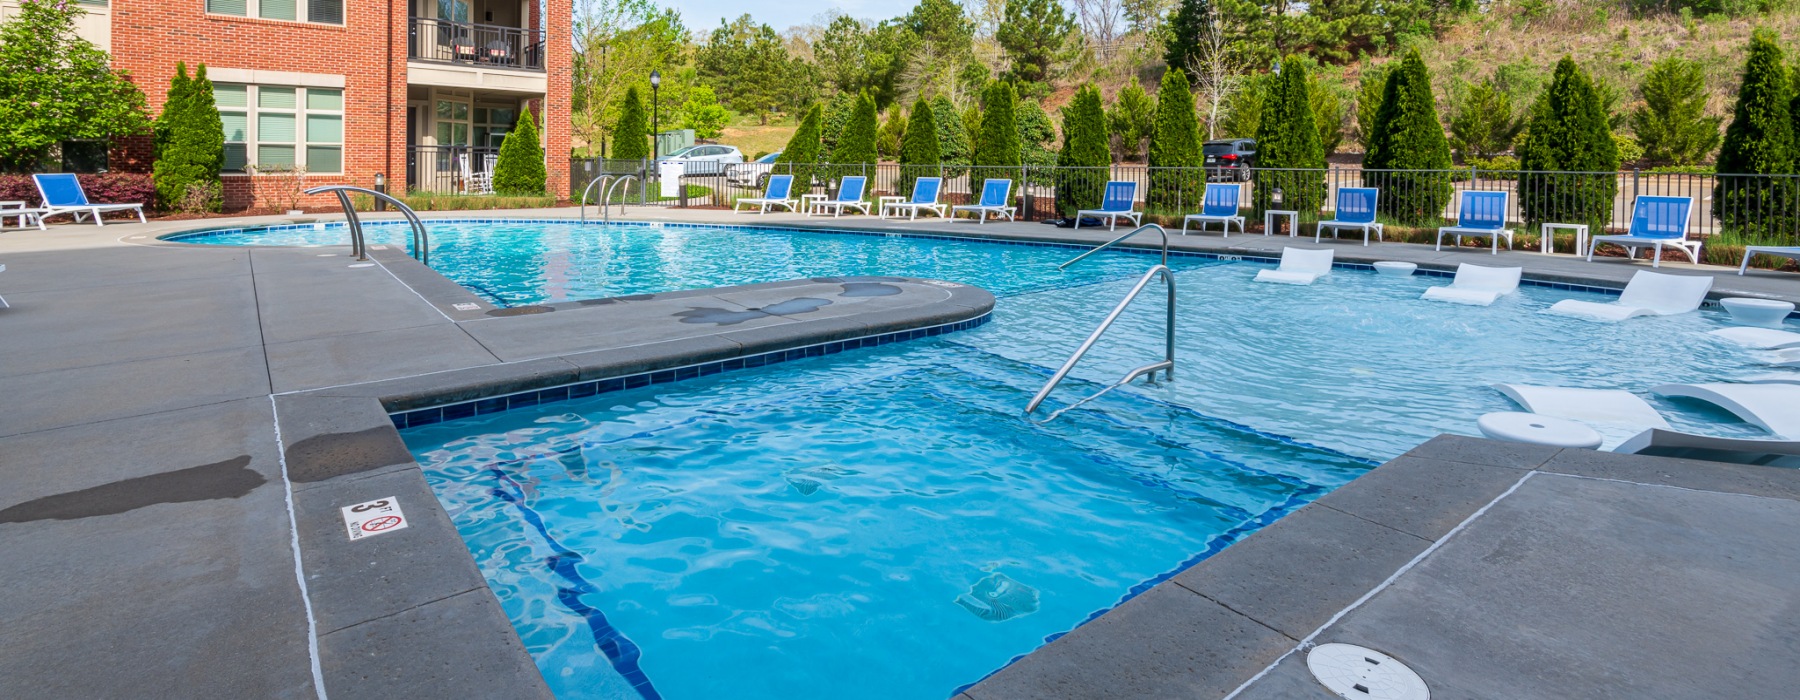 Resort inspired pool at Palladian Place Apartments